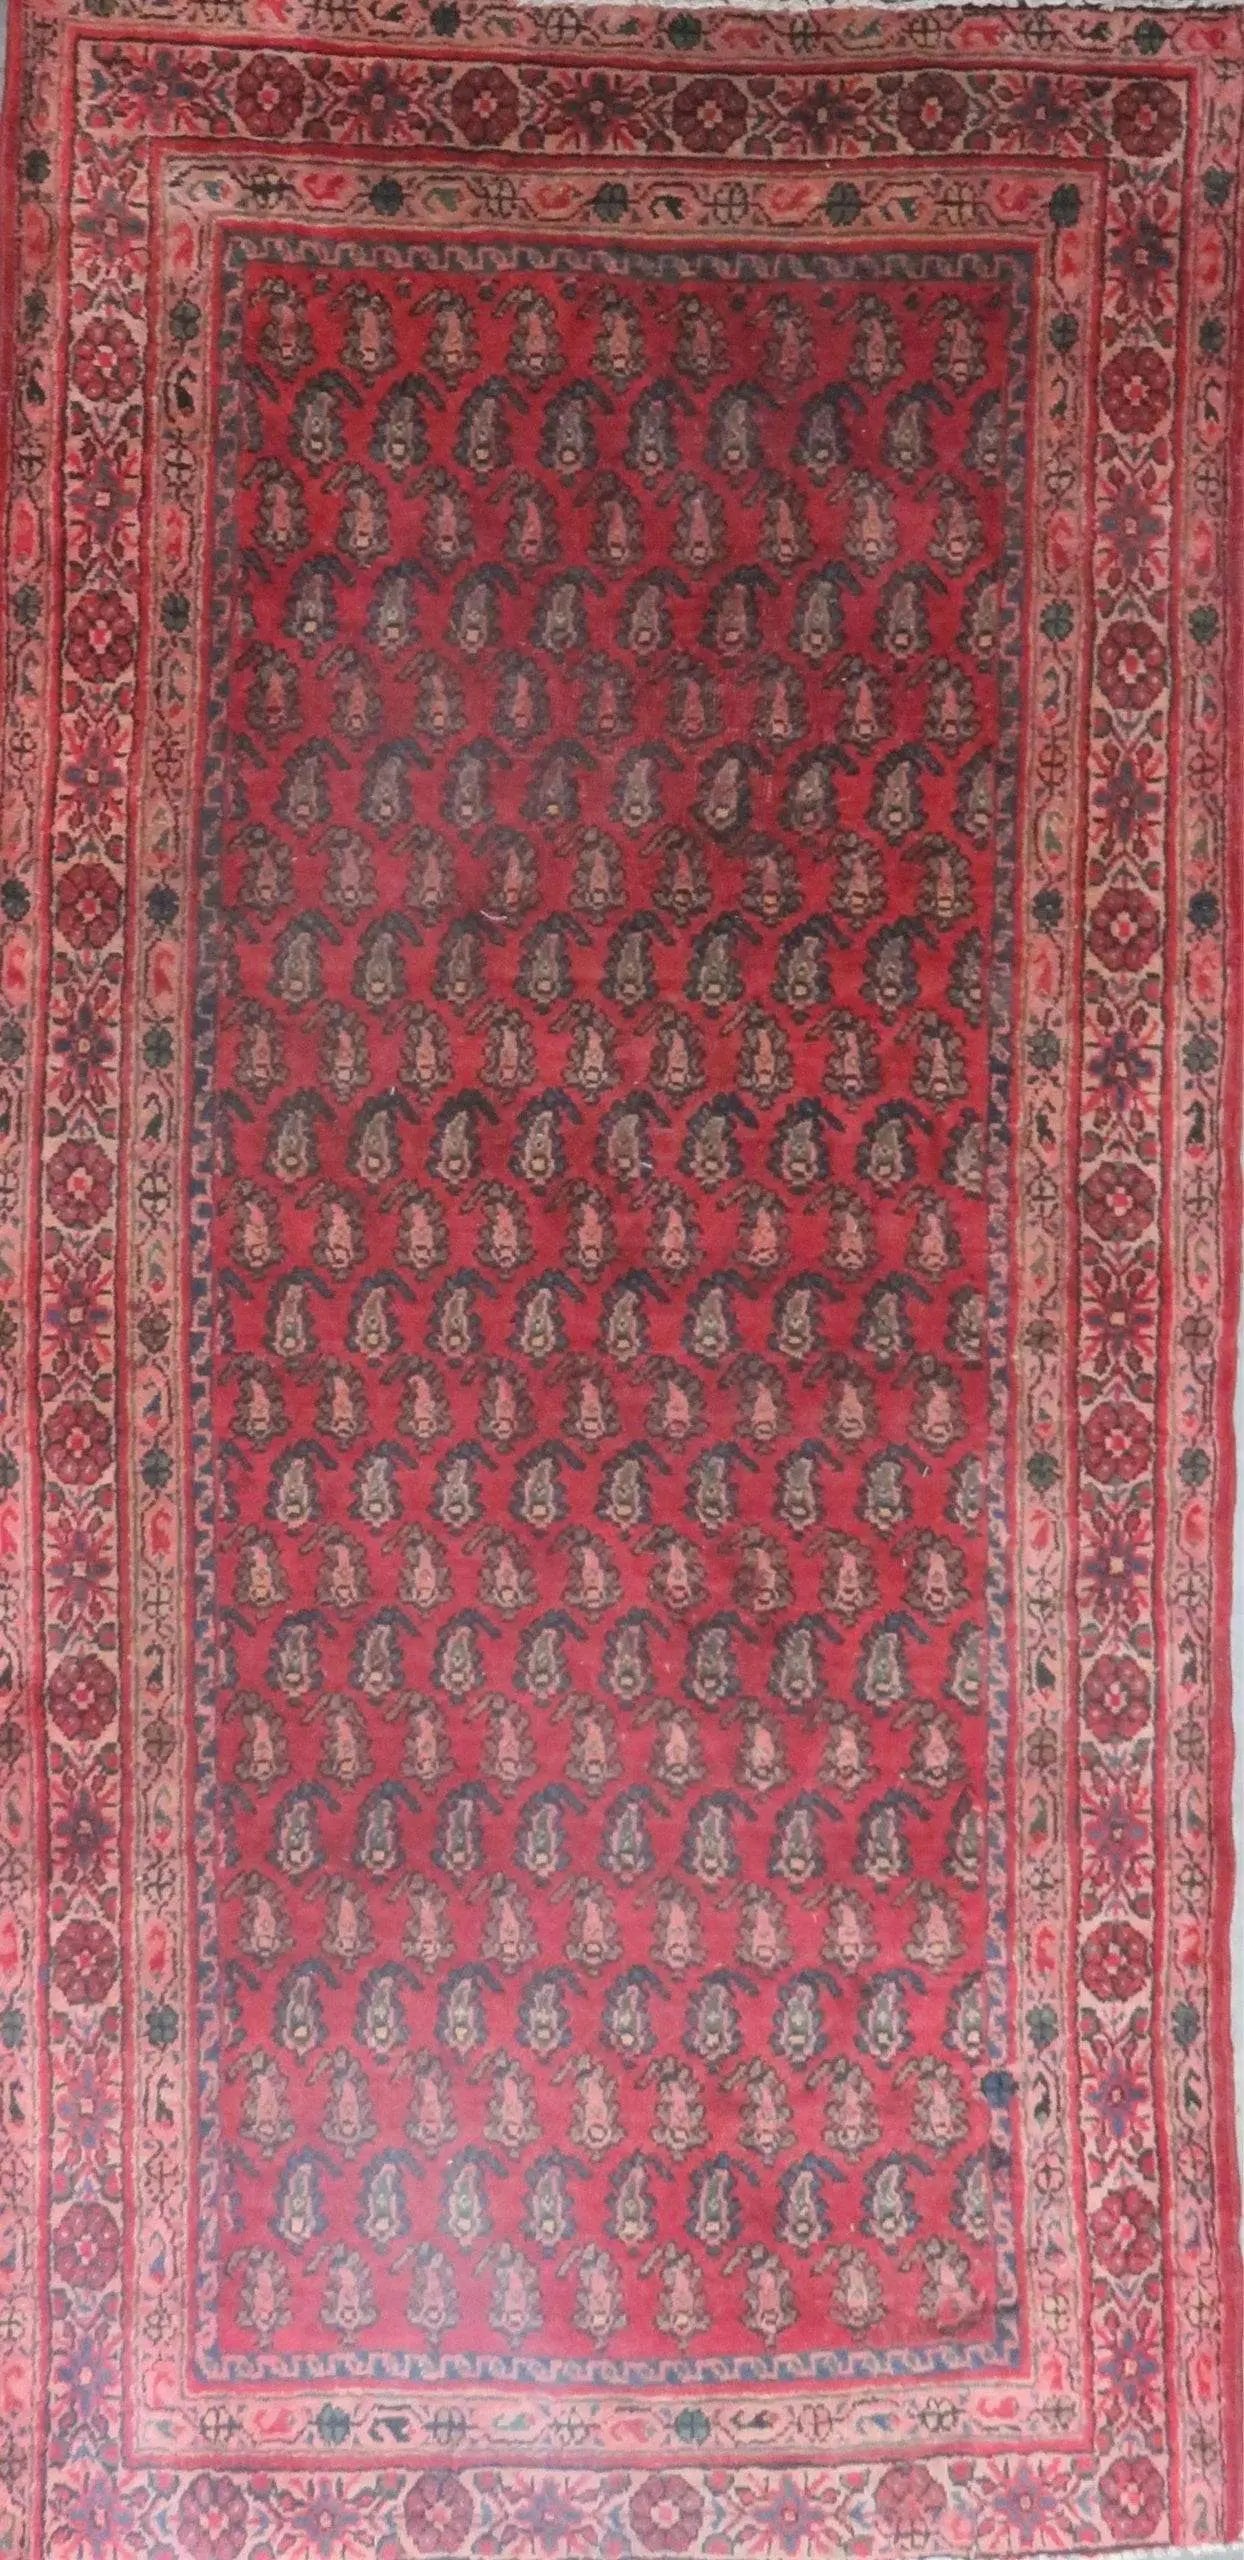 Hand-Knotted Persian Wool Rug _ Luxurious Vintage Design, 17'2" x 3'5", Artisan Crafted